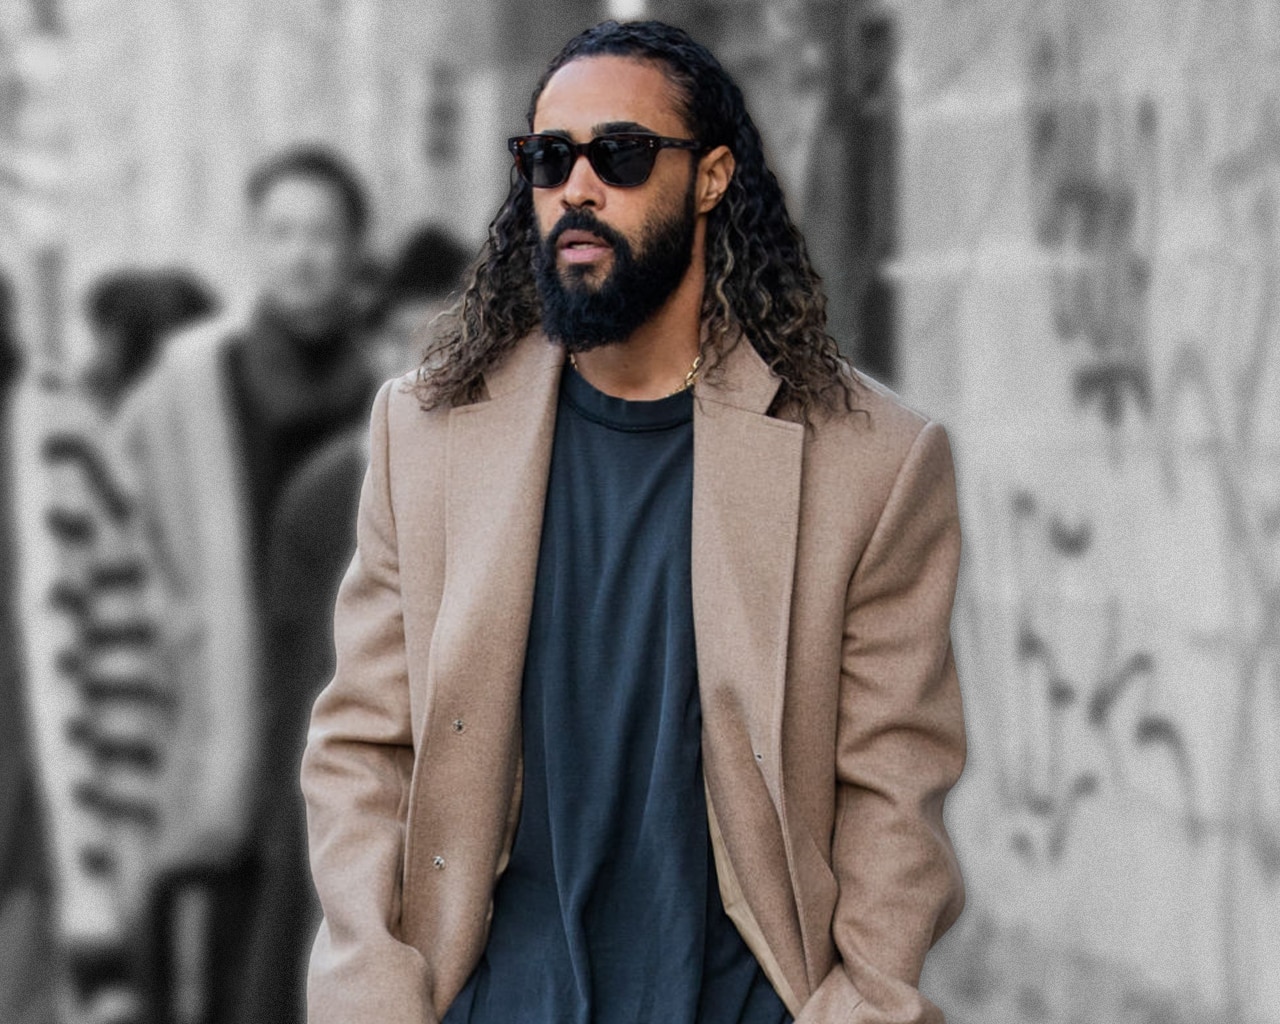 Everything you need to know about Jerry Lorenzo and Fear of God